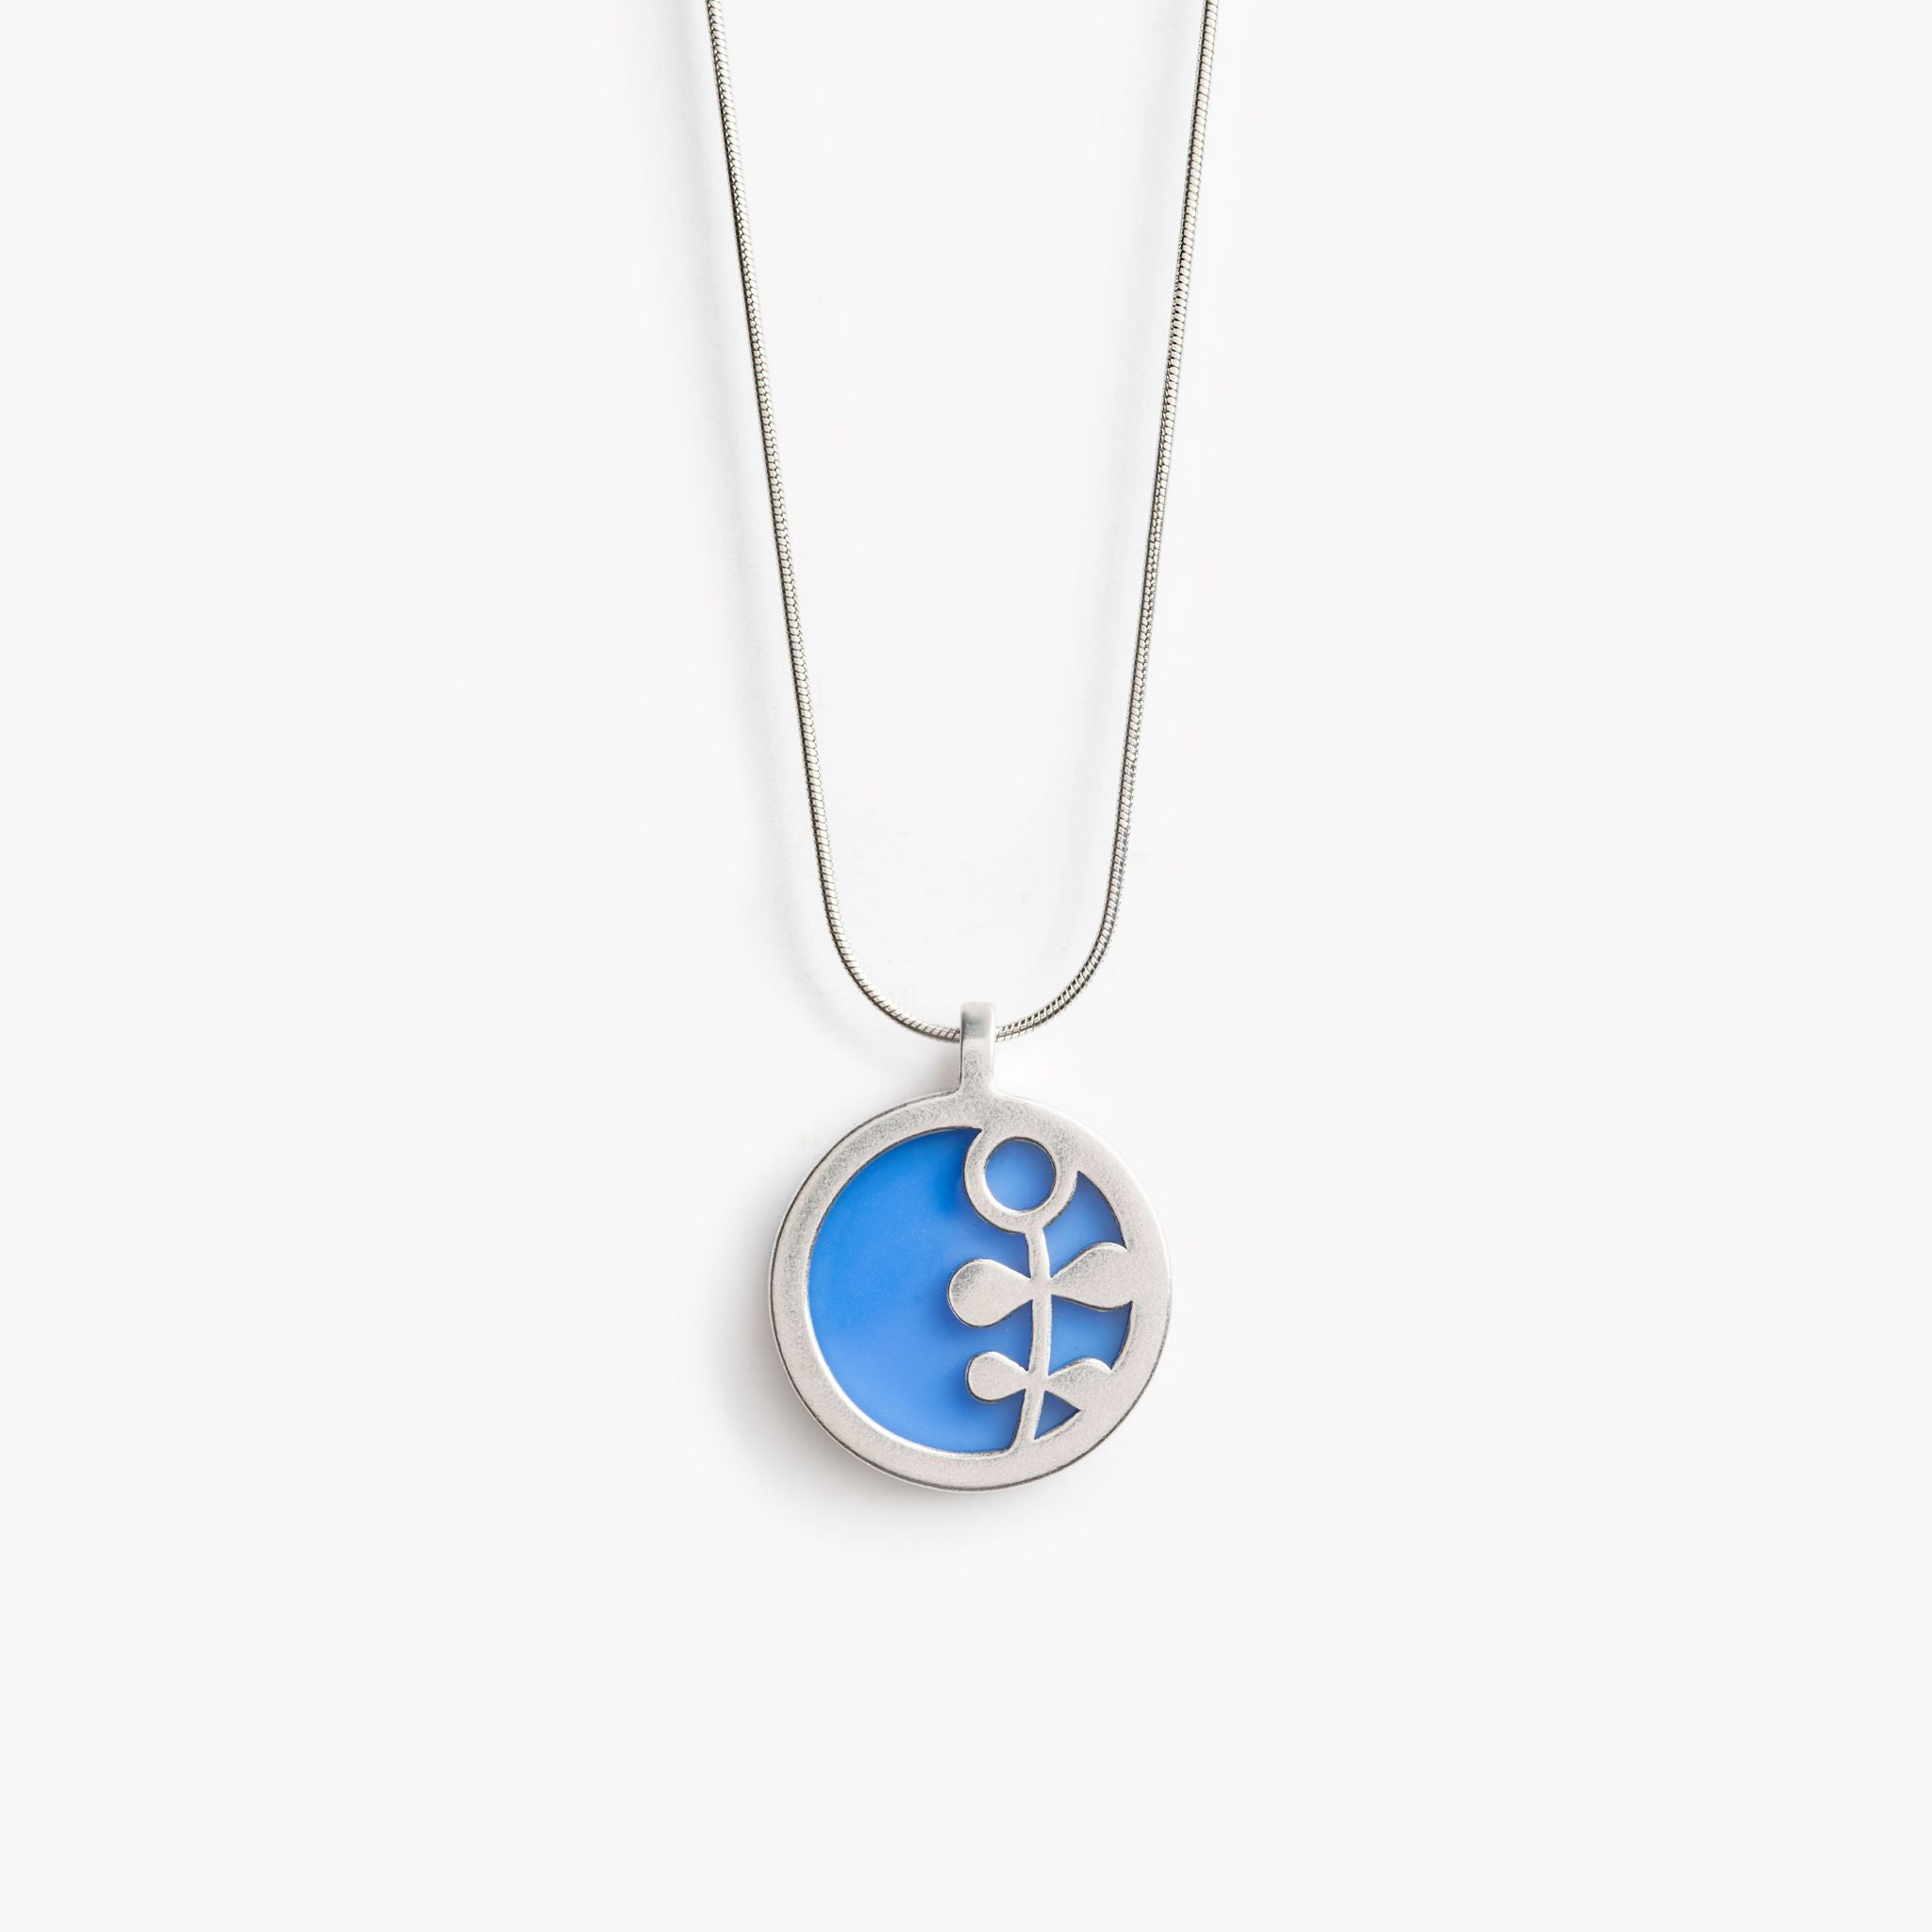 The image shows a circular pendant with a simple Scandinavian style flower stem design.  It has a coastal blue inset which is surrounded by brightly polished pewter, with the flower stem also highlighted in polished pewter. The pendant is bathed in sunlight on a crisp white  background. This is a simple yet vibrant, modern and colourful pendant necklace design.